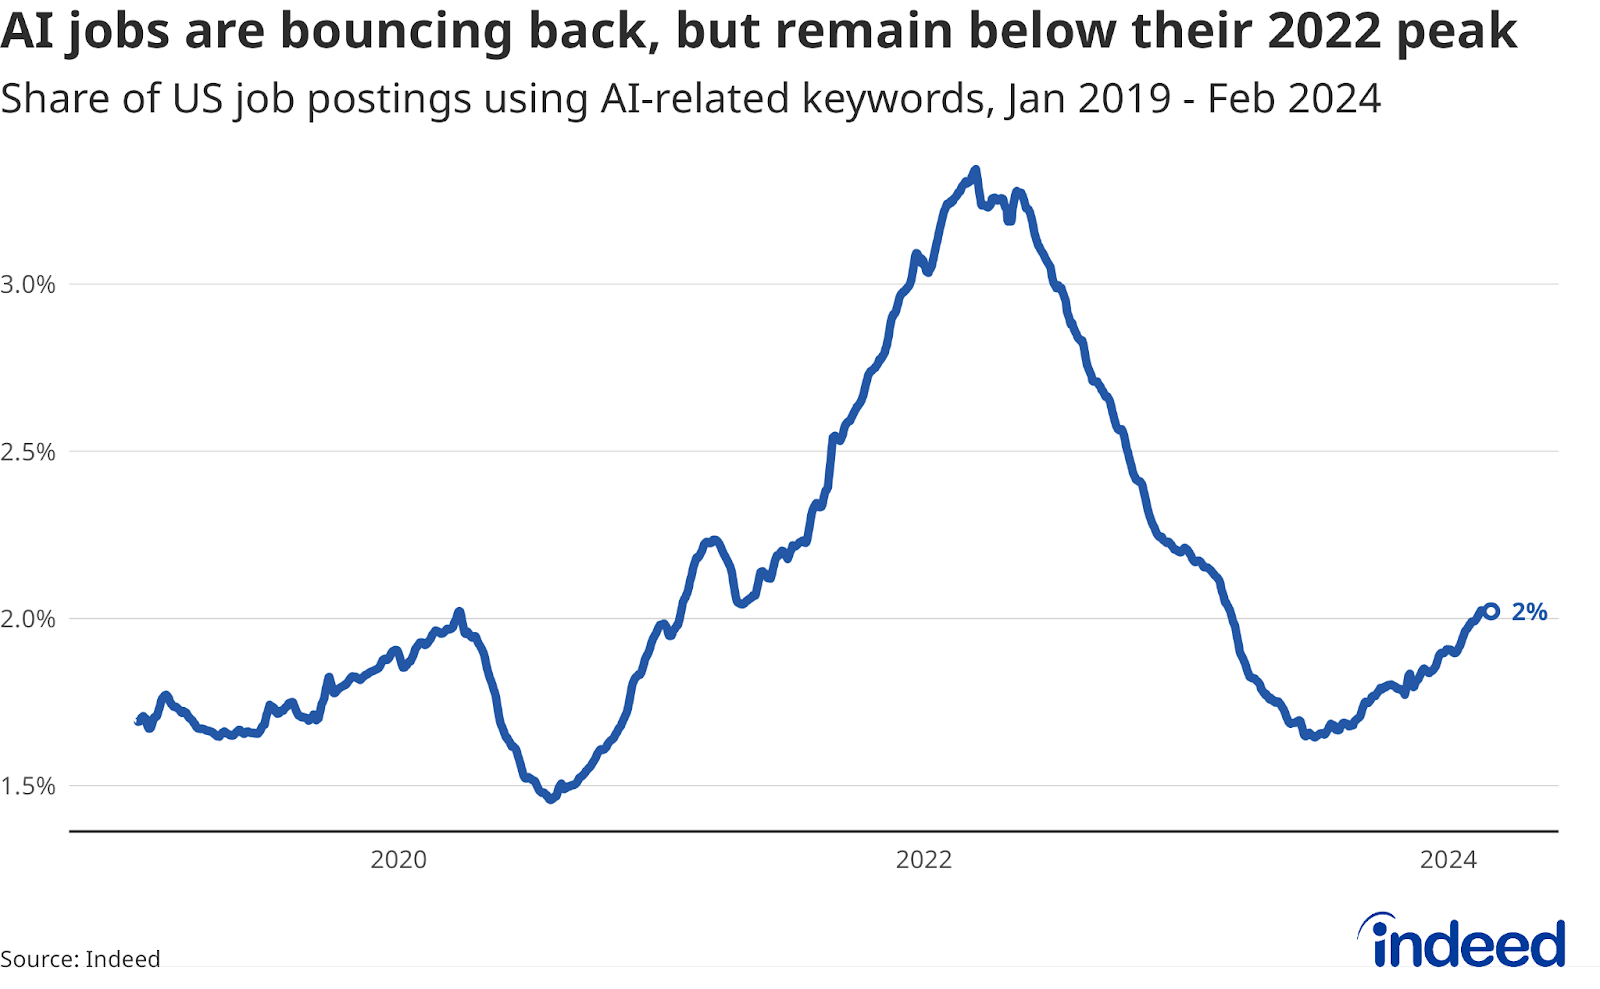 A line graph titled “AI jobs are bouncing back, but remain below their 2022 peak” showing the share of AI-related jobs in the US from January 2019 through February 2024. The graph shows a large rise in 2021 in the AI job postings share and then a dramatic drop until June 2023. The AI share then rises through February 2024.